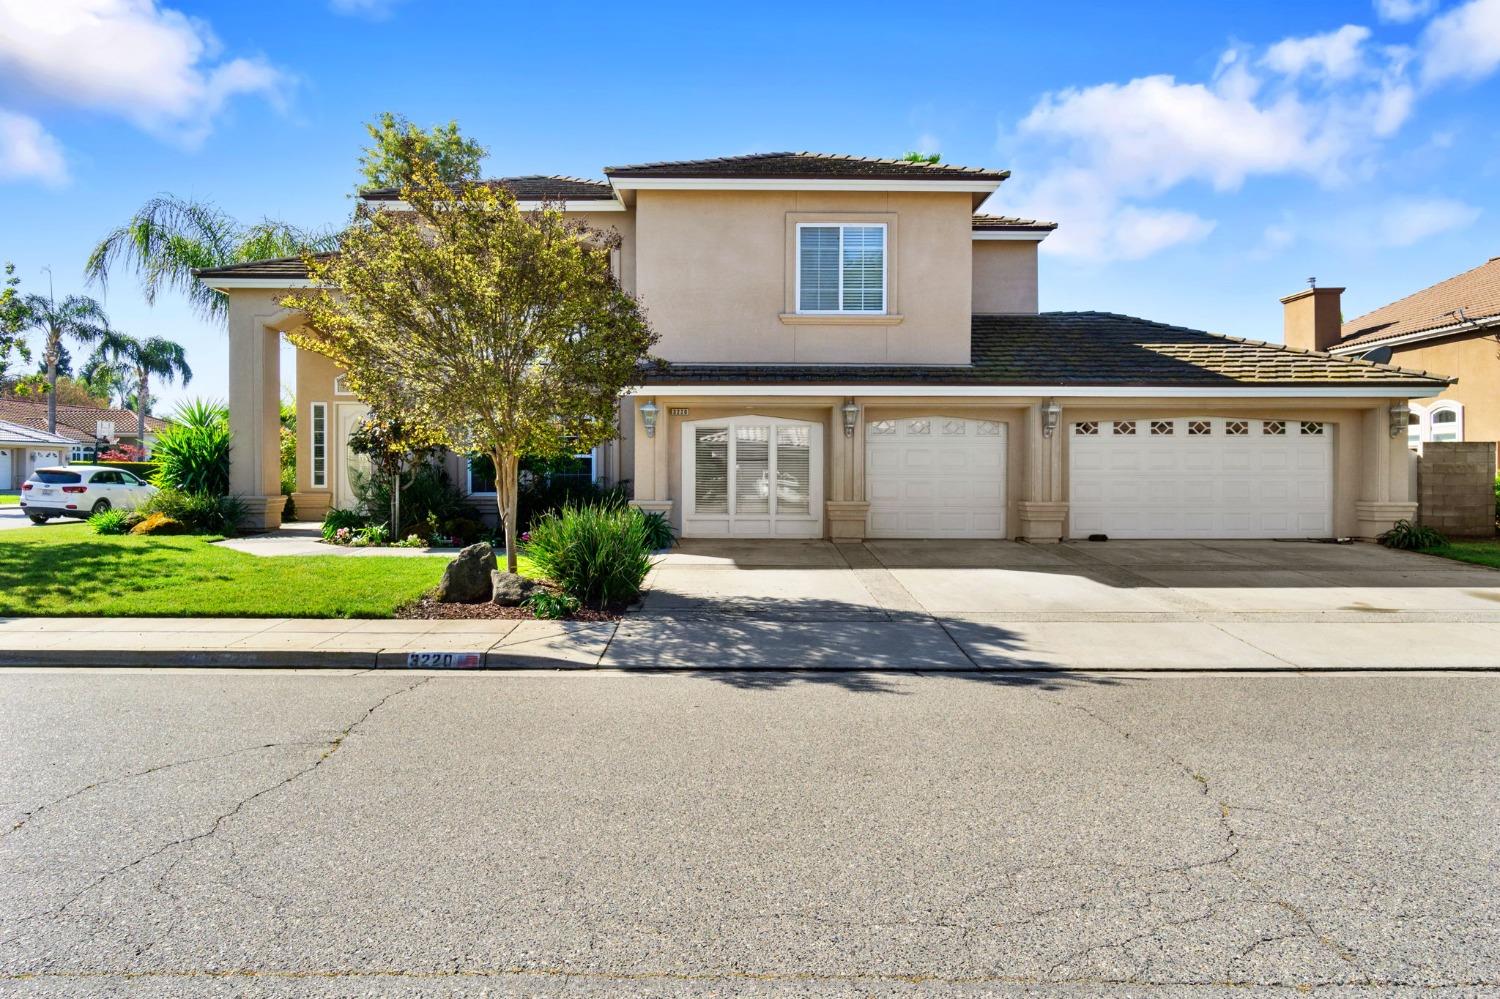 Photo of 3220 Common Wy in Madera, CA